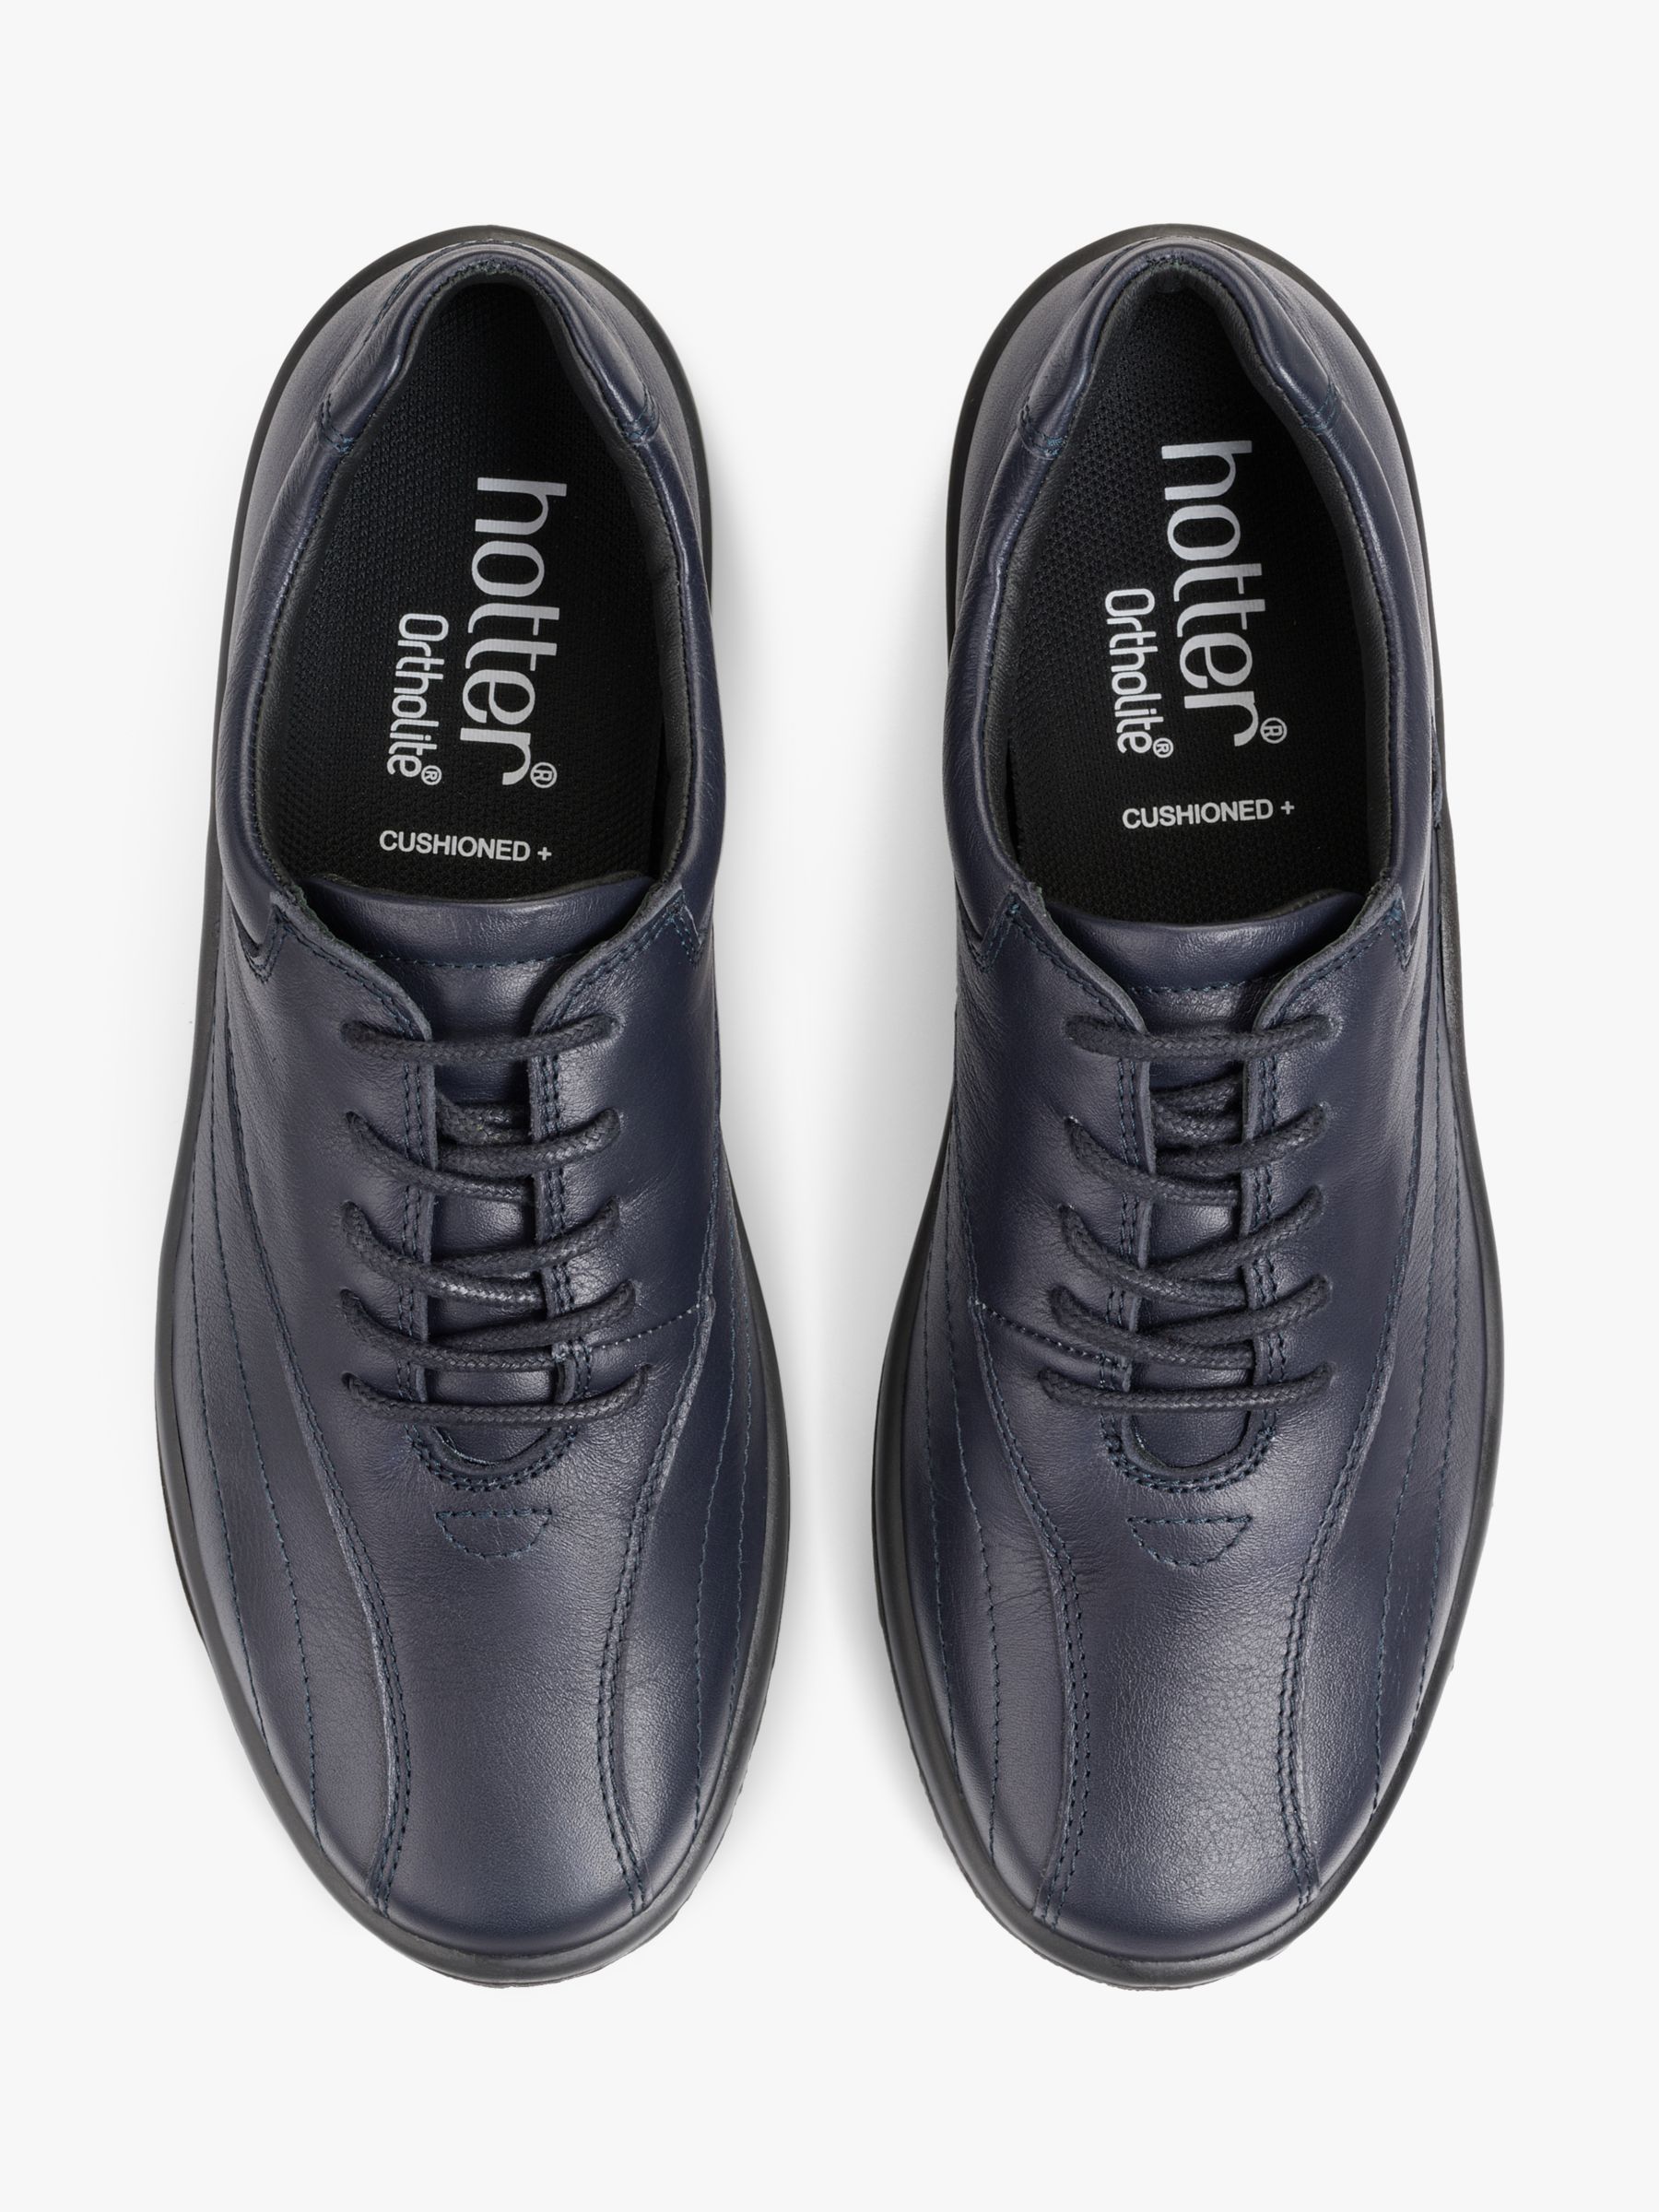 Hotter Tone II Leather Lace Up Trainers, Navy at John Lewis & Partners